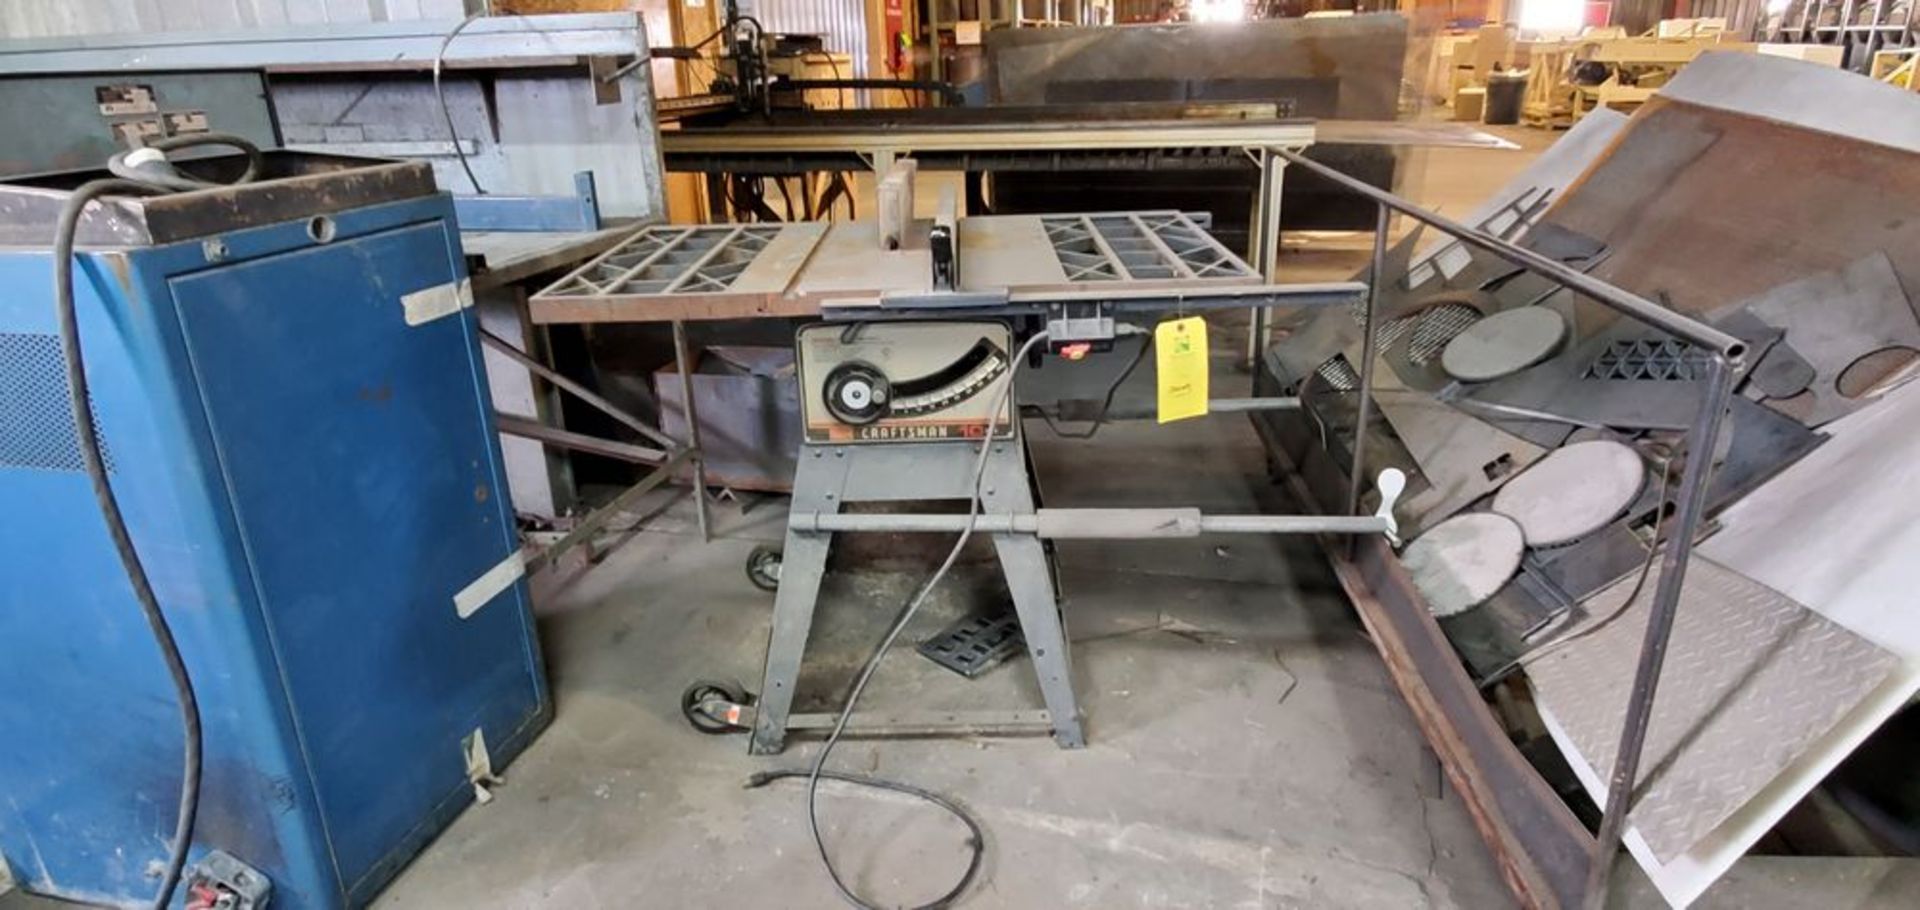 Located in Canon City, CO -- Craftsman 10"table saw loading fee $50 ***Note from Auctioneer: Loading